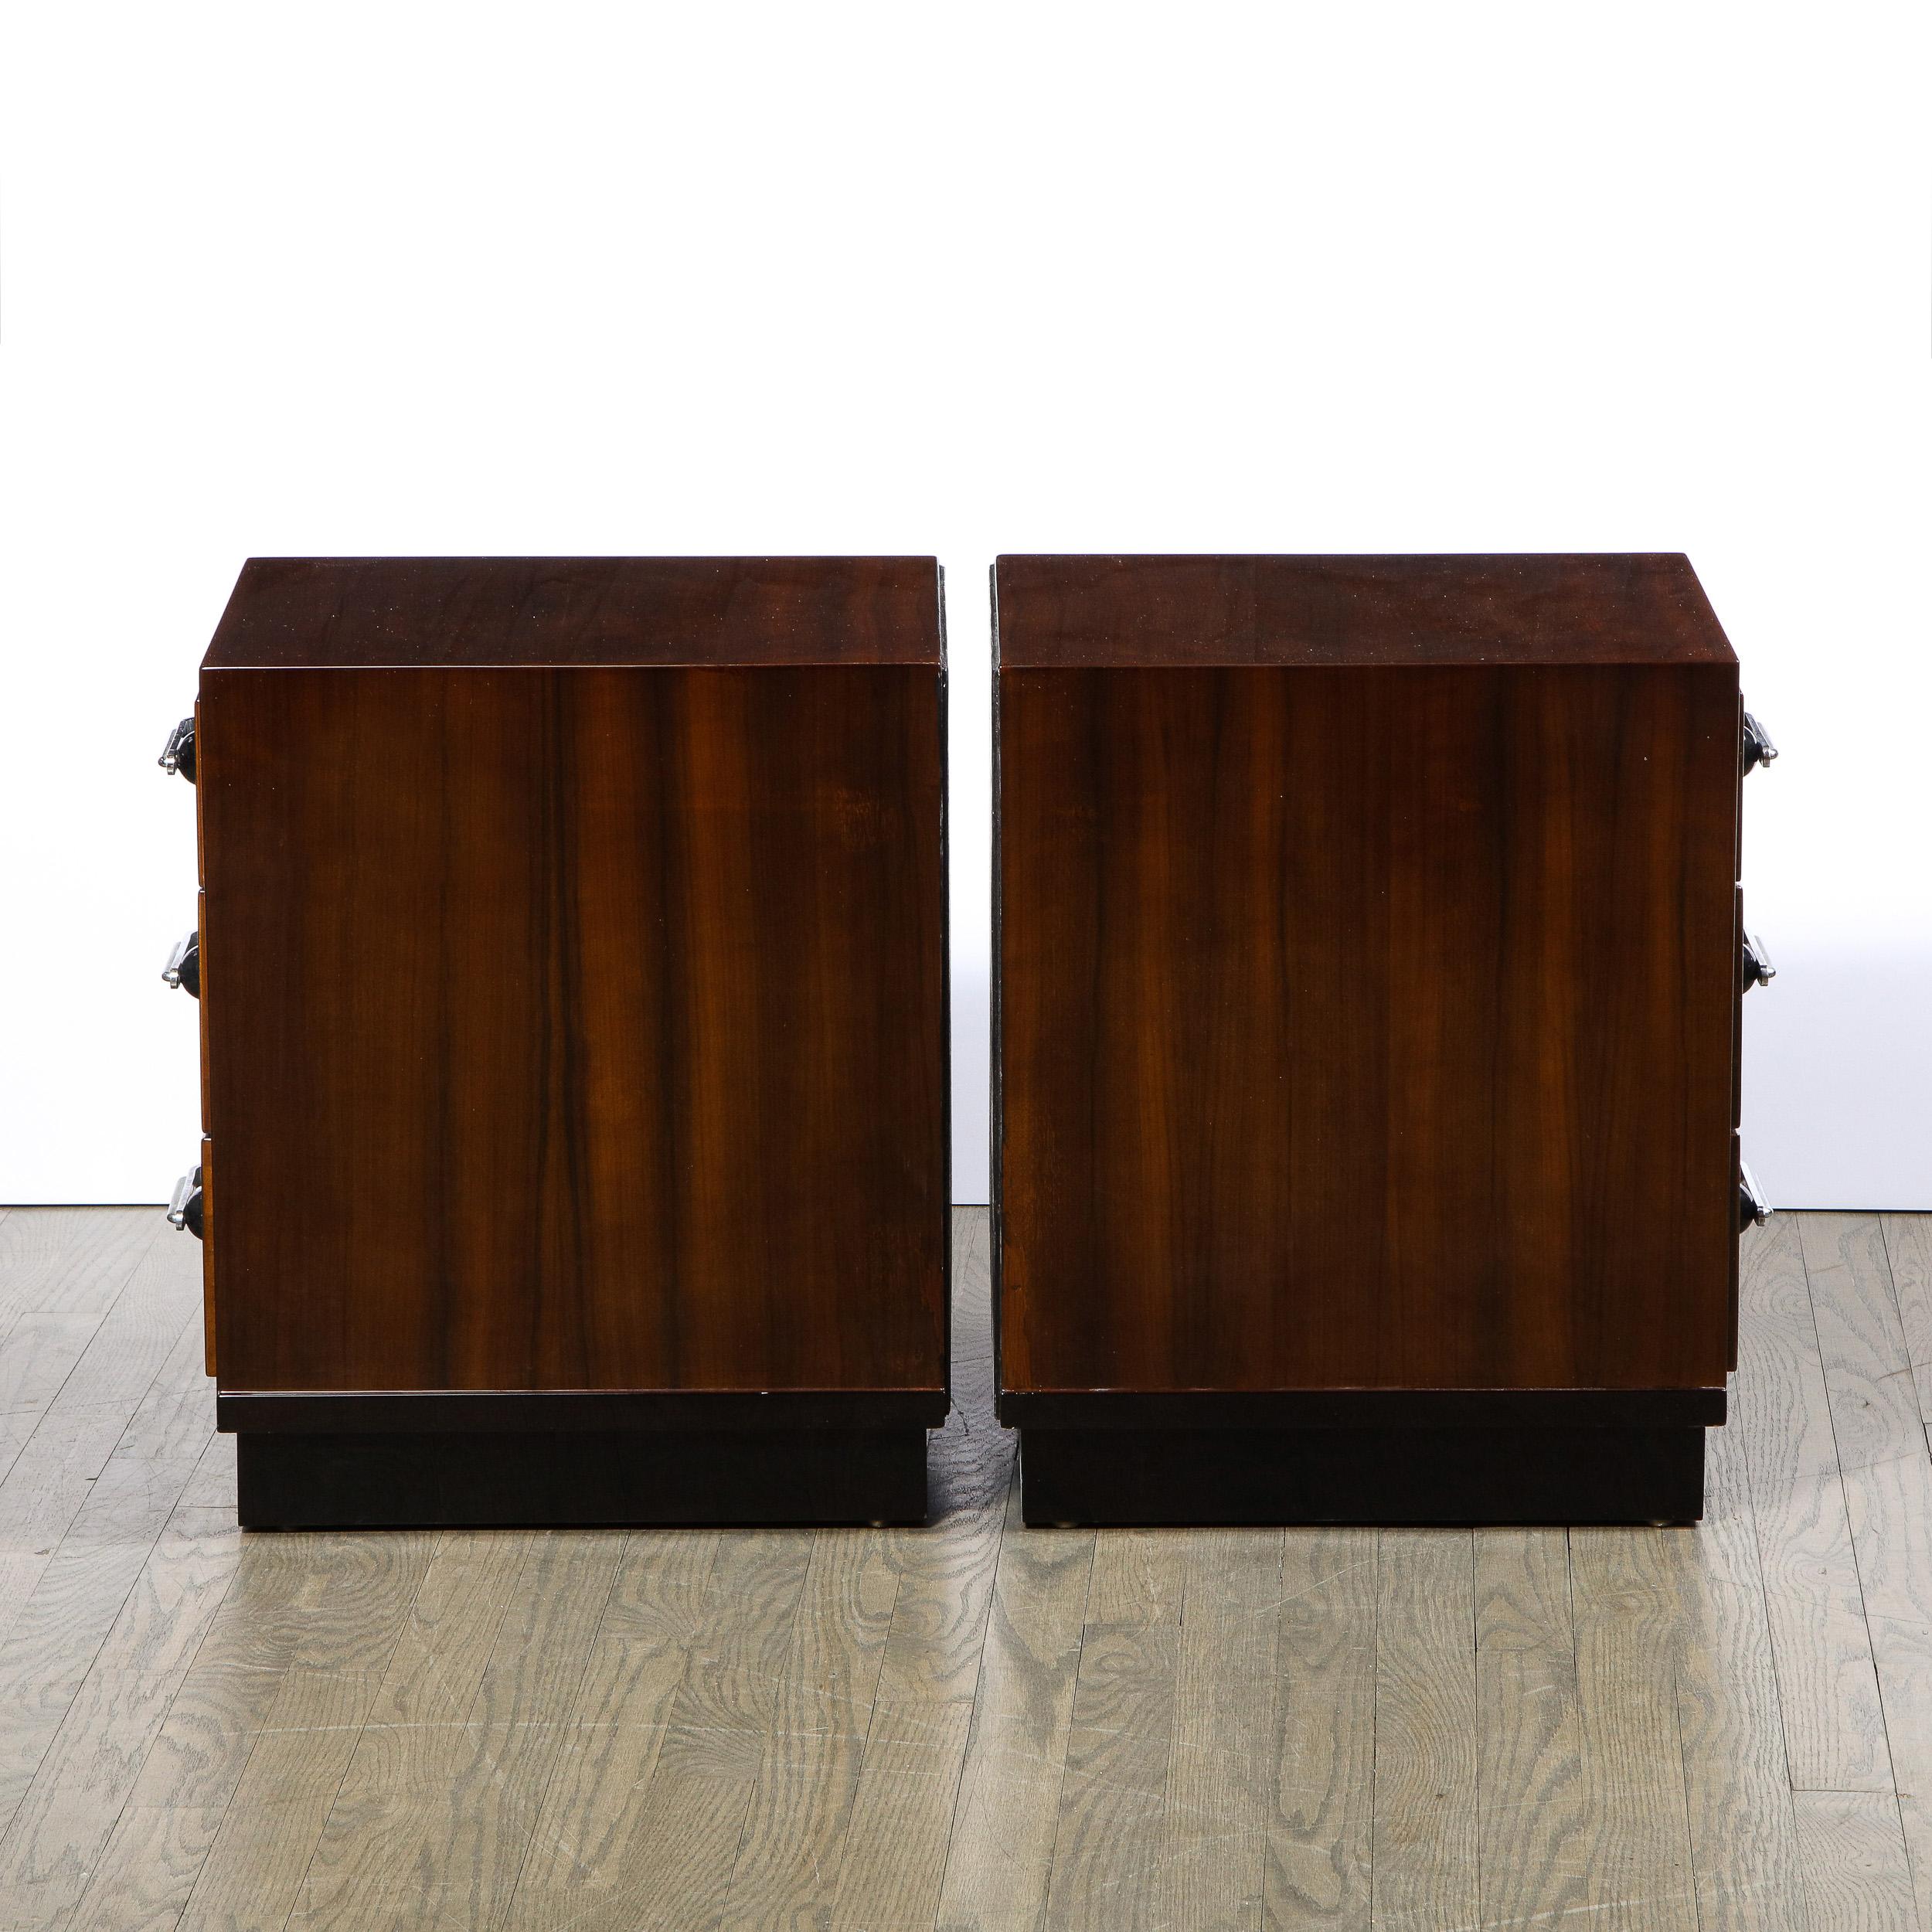 Pair of Art Deco Nightstands in Lacquer & Walnut w/ Streamlined Chrome Pulls 4